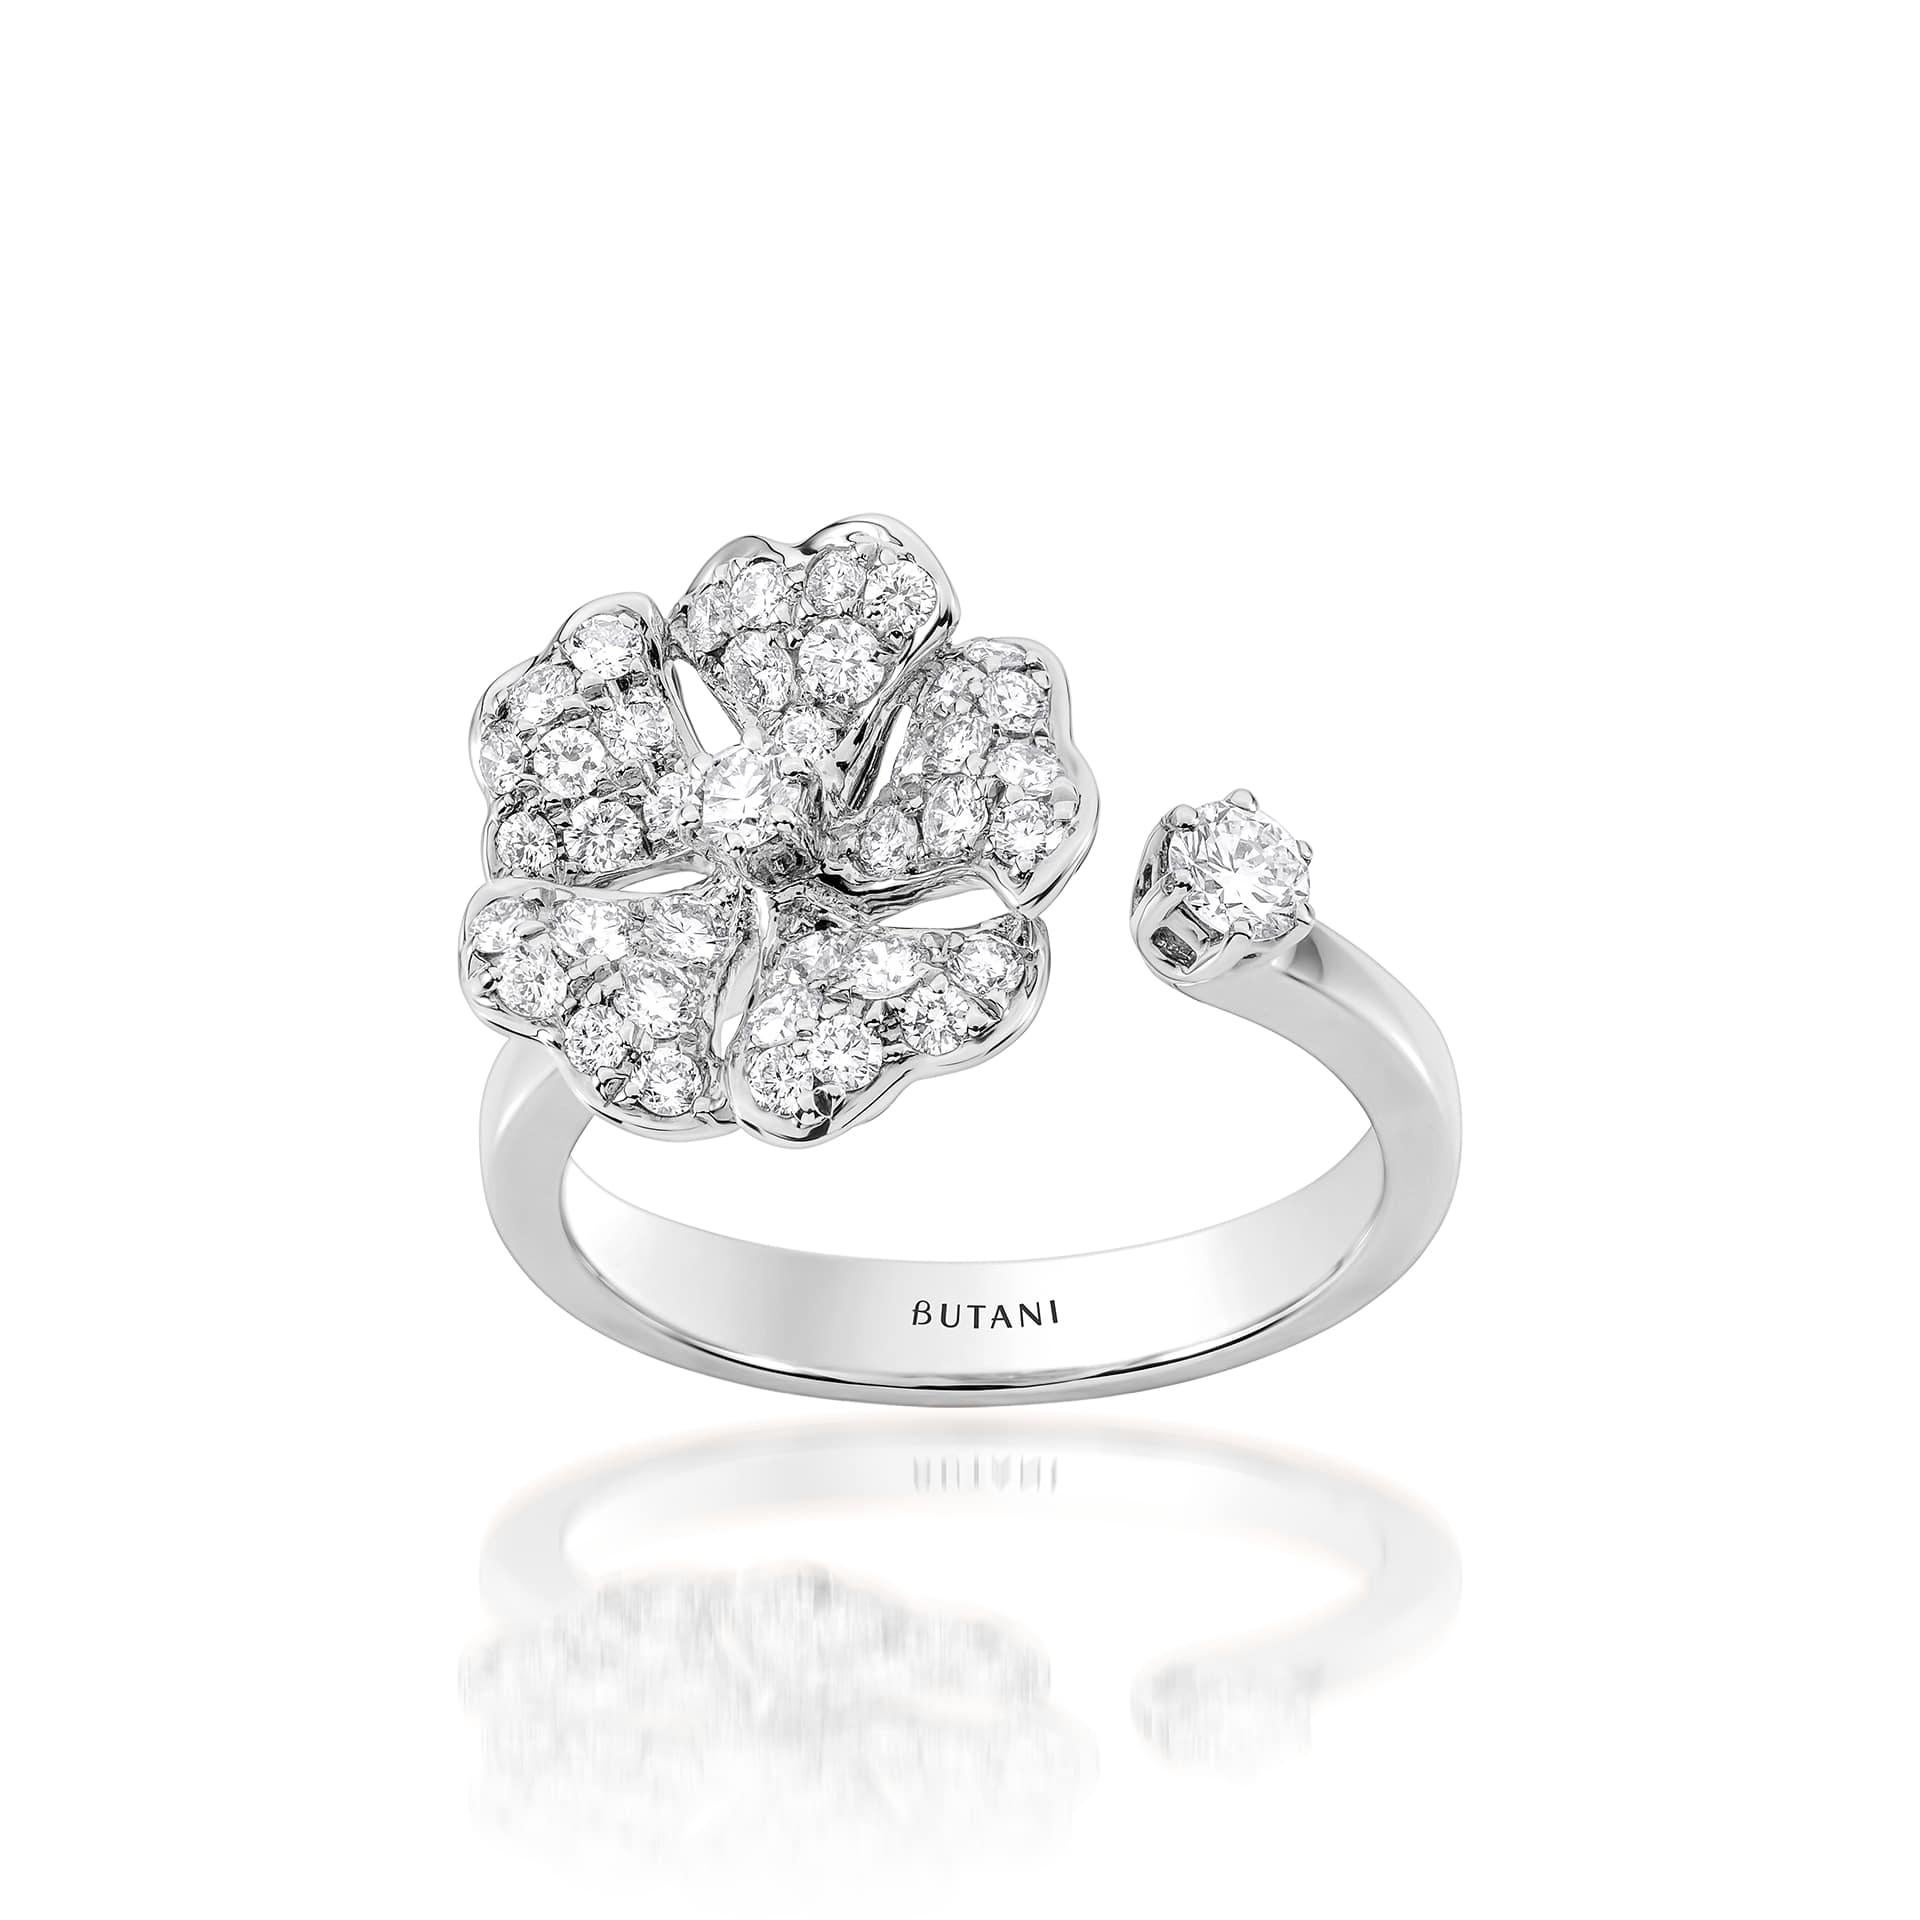 Bloom Gold and Pavé Diamond Open Ring in 18K White Gold

Inspired by the exquisite petals of the alpine cinquefoil flower, the Bloom collection combines the richness of diamonds and precious metals with the light versatility of this delicate,